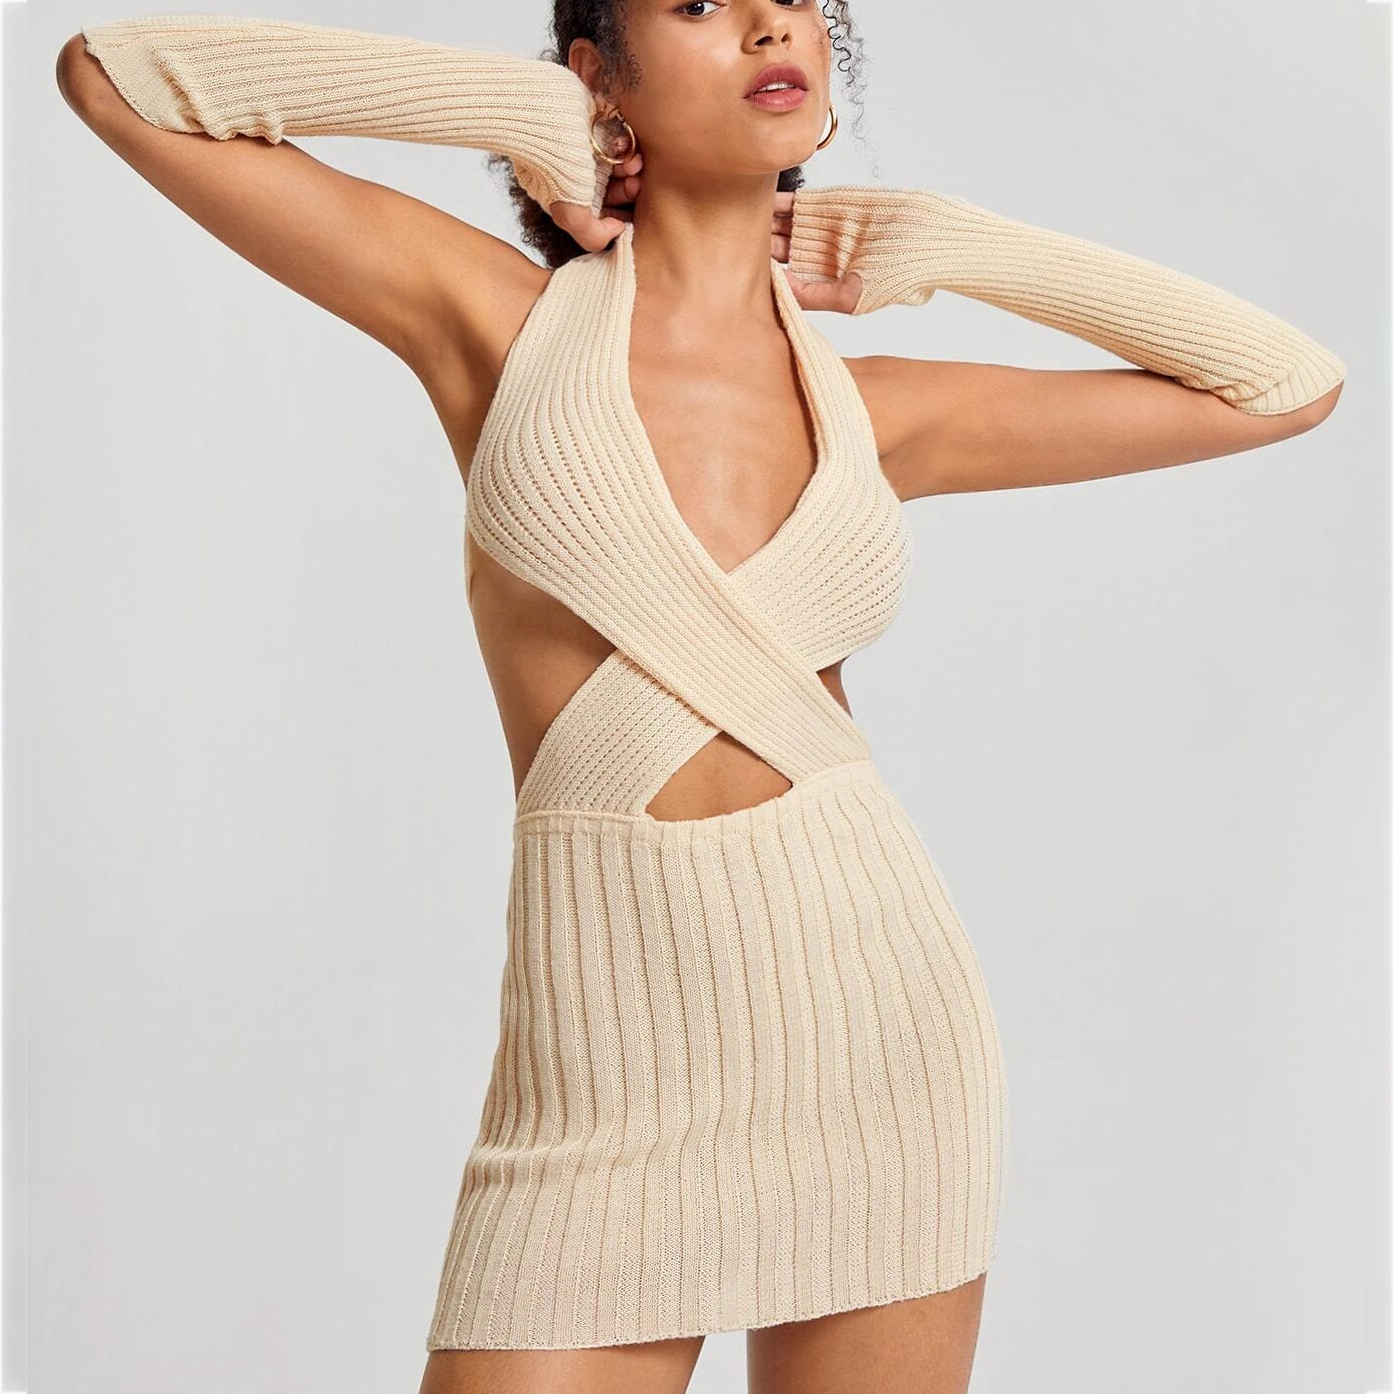 Crisscross Halter Neck Backless Ribbed Knit Bodycon Sweater Dress With Arm Sleeves - L